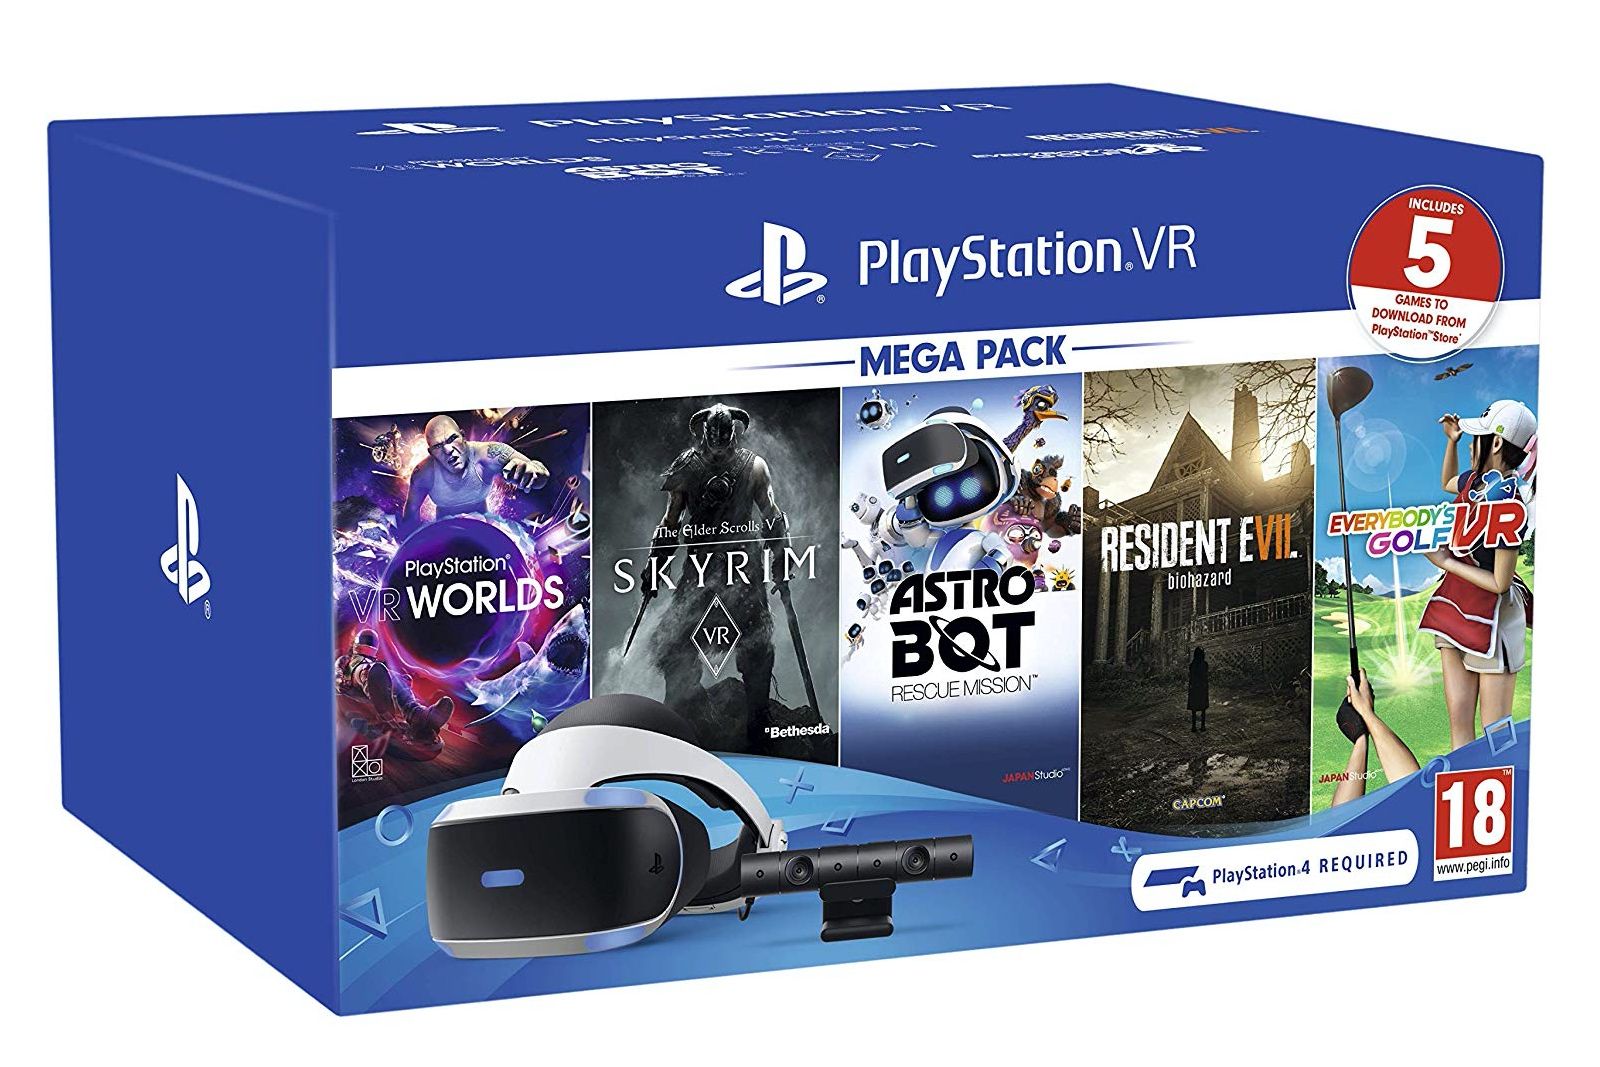 The Best Playstation 4 Bundles Great Deals On Ps4 Consoles And Games image 1